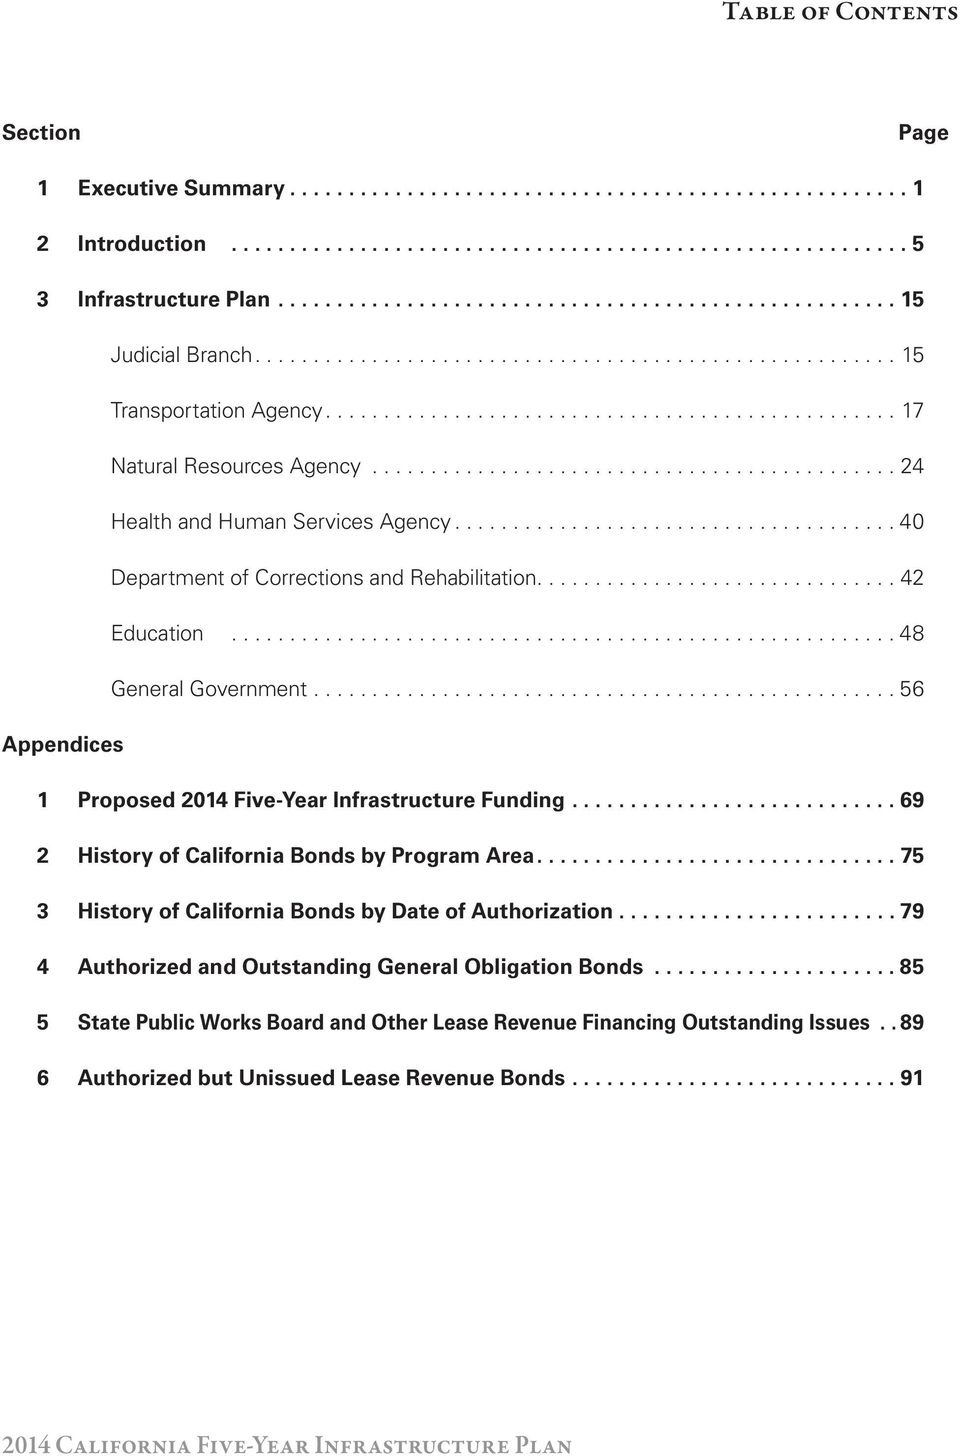 .. 56 Appendices 1 Proposed 2014 Five-Year Infrastructure Funding... 69 2 History of California Bonds by Program Area.... 75 3 History of California Bonds by Date of Authorization.